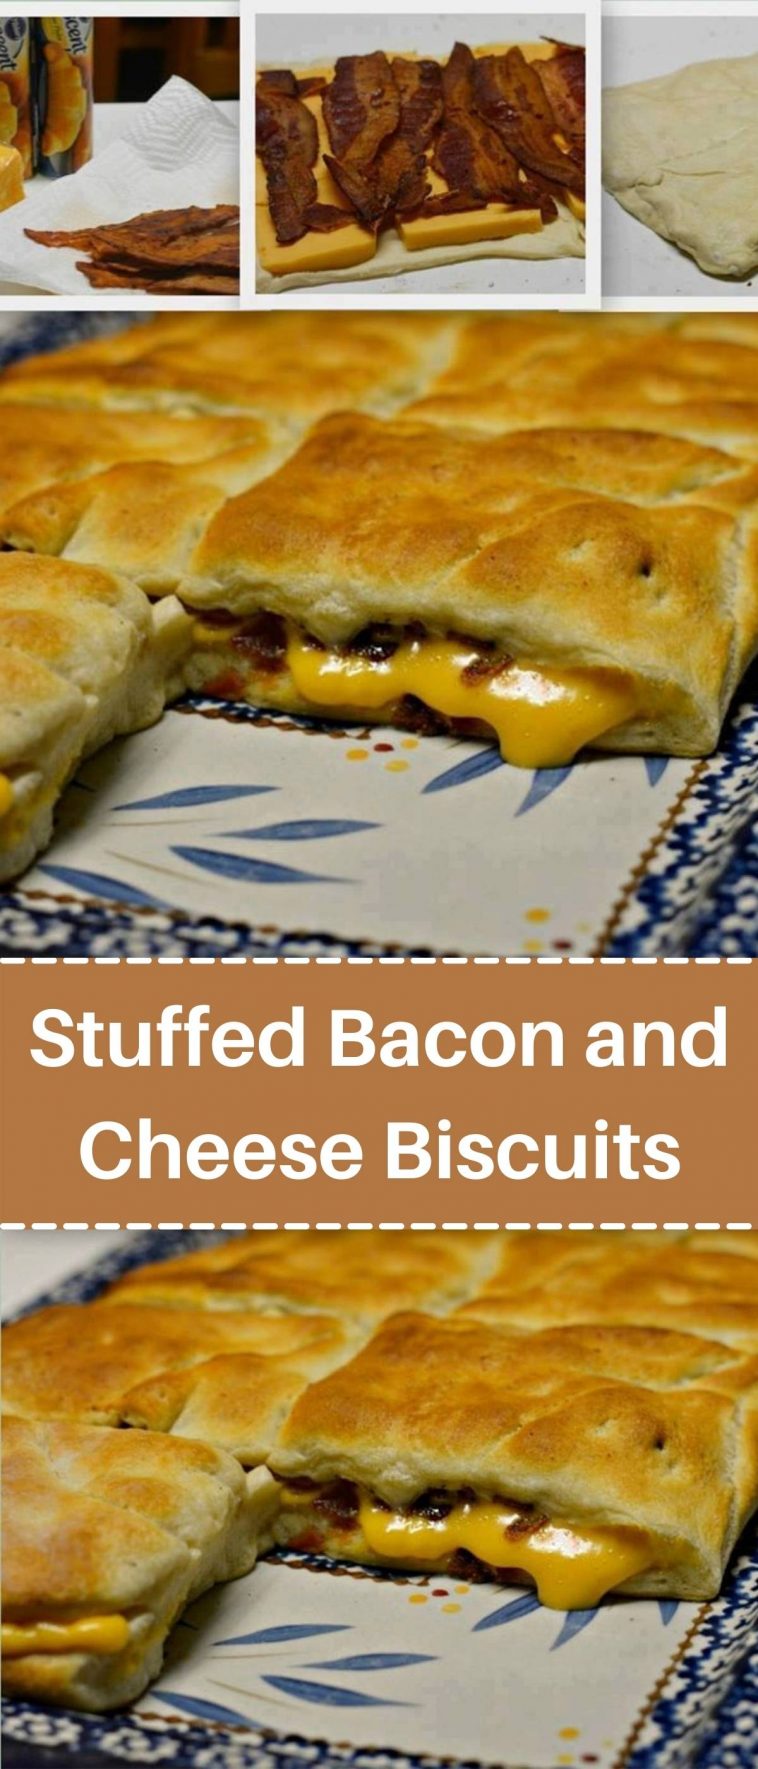 Stuffed Bacon and Cheese Biscuits